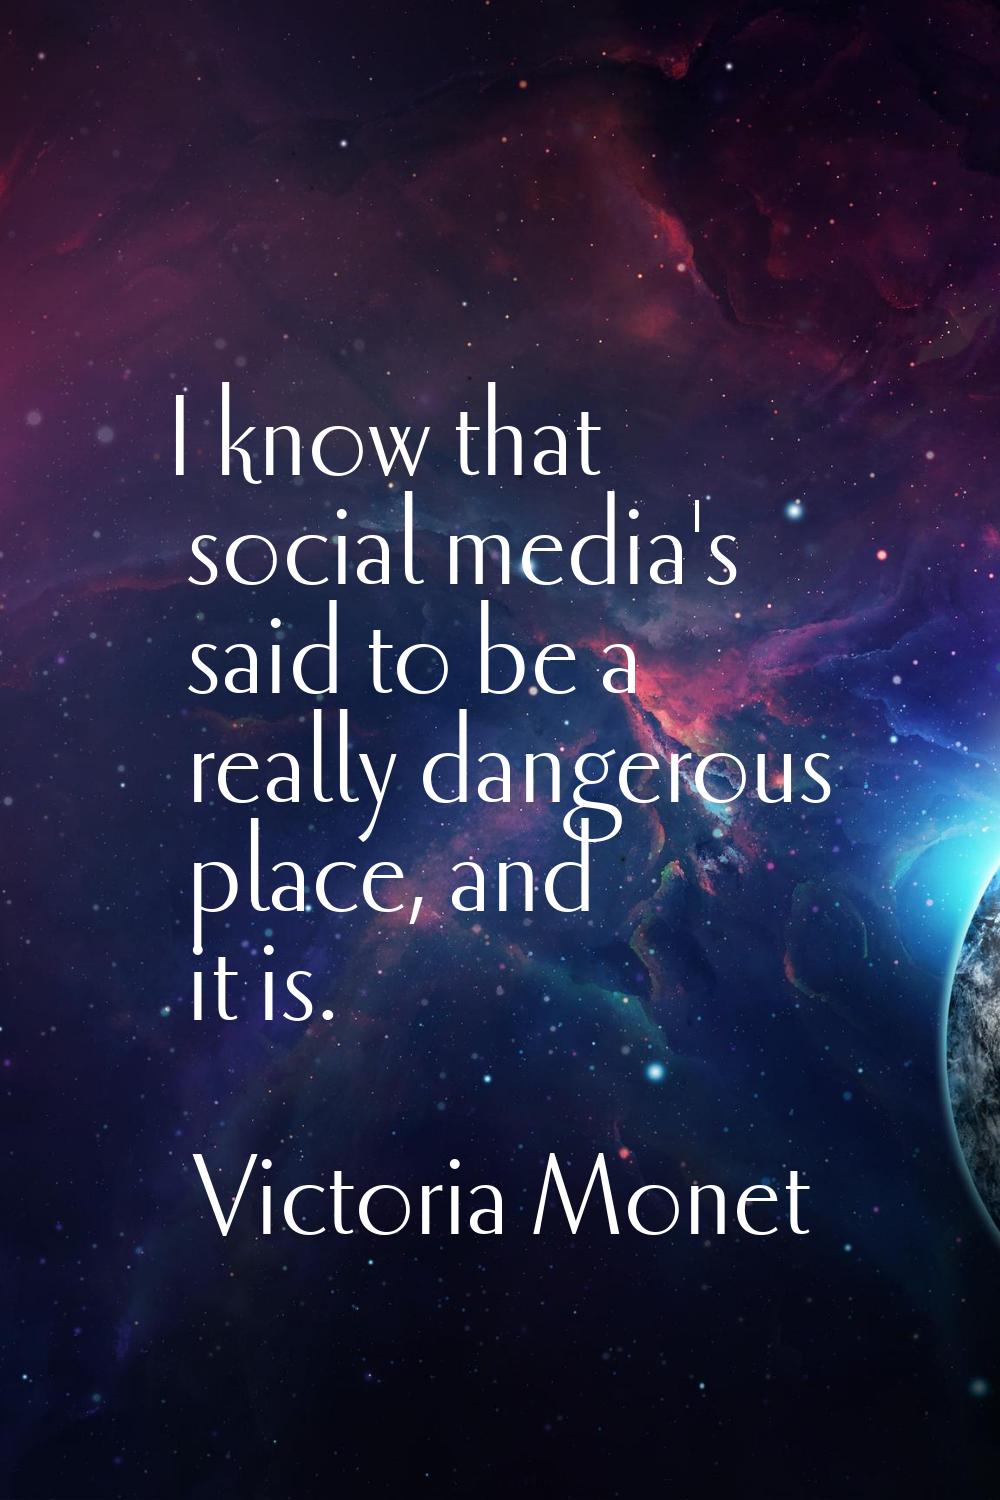 I know that social media's said to be a really dangerous place, and it is.